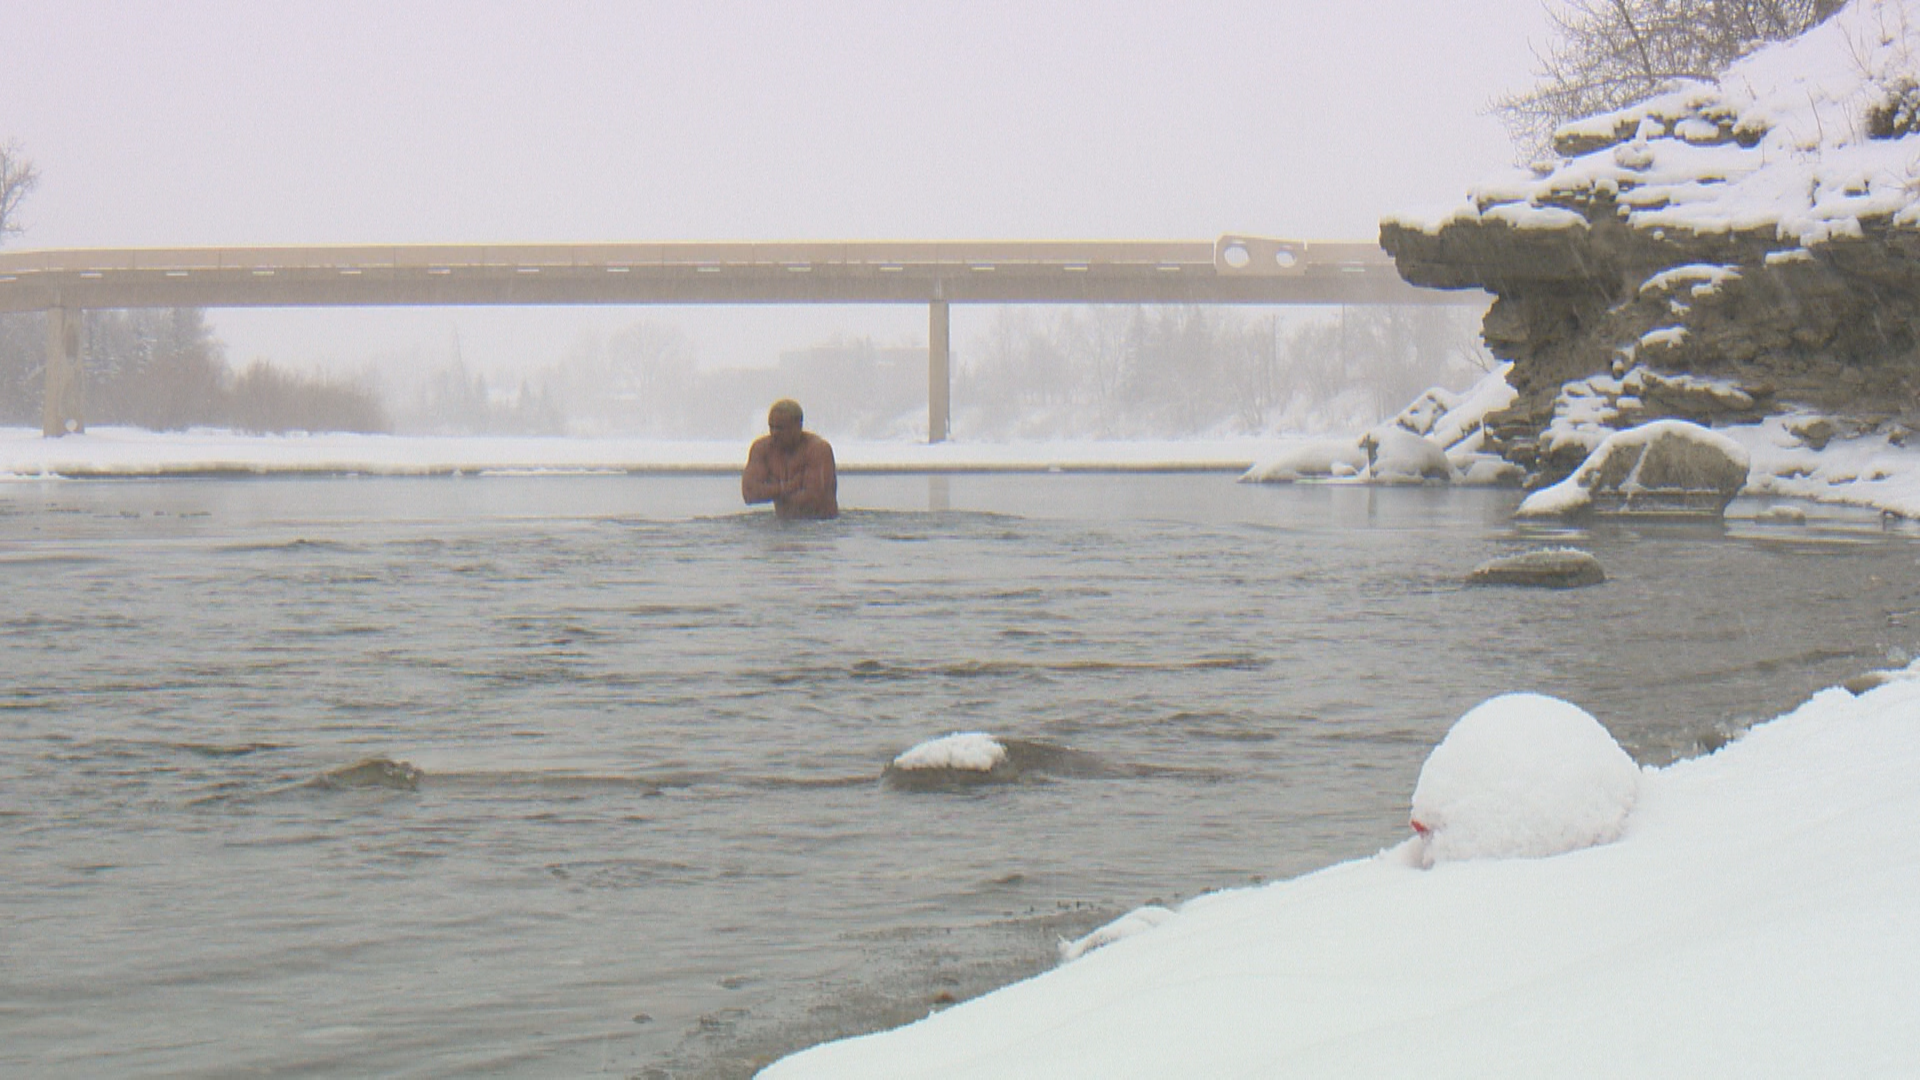 Man trains in Bow River to try and break ice bath world record in Calgary